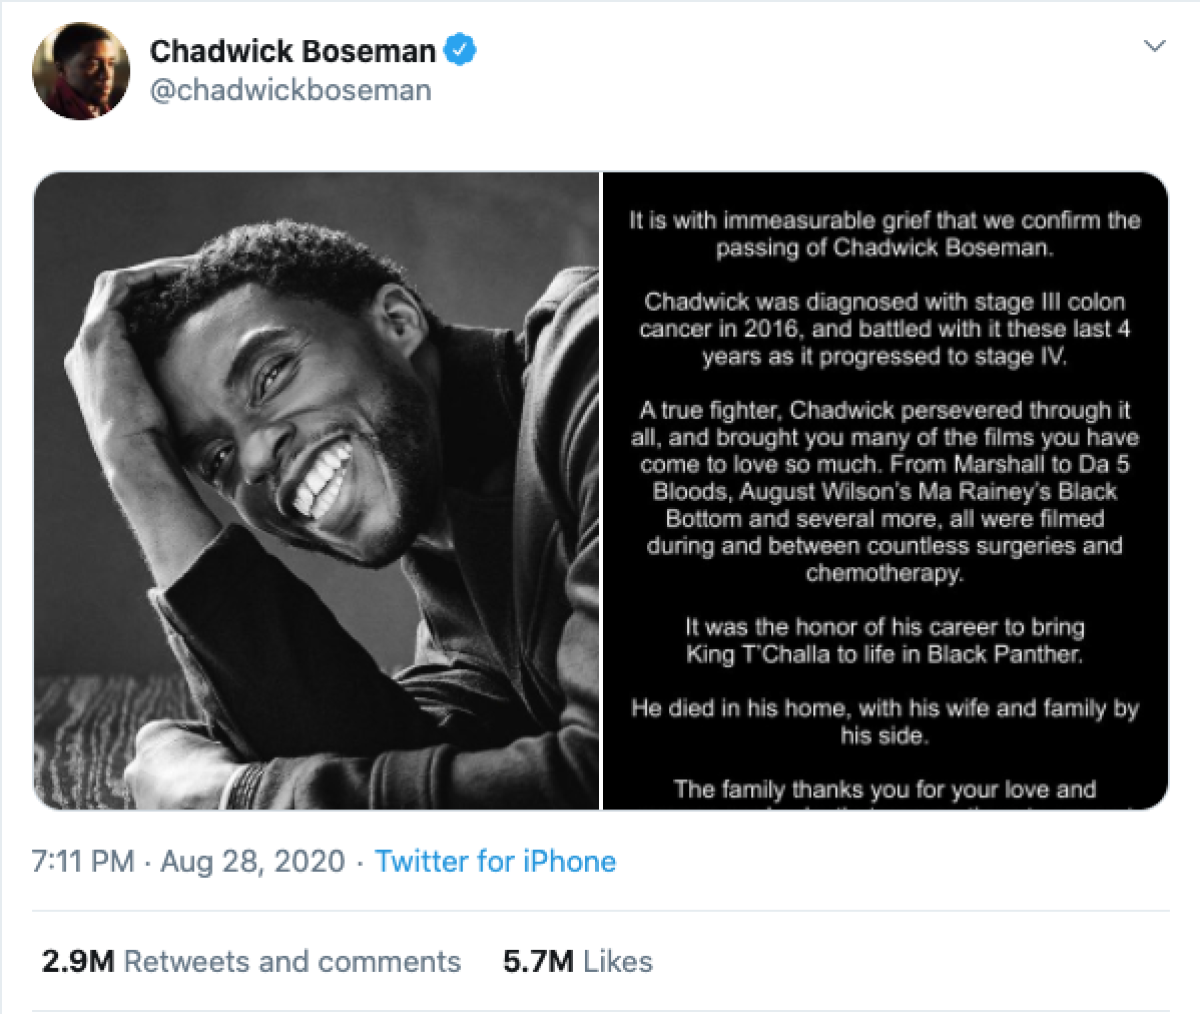 Most Liked Tweet Is From Chadwick Bosemans Account Los Angeles Times 